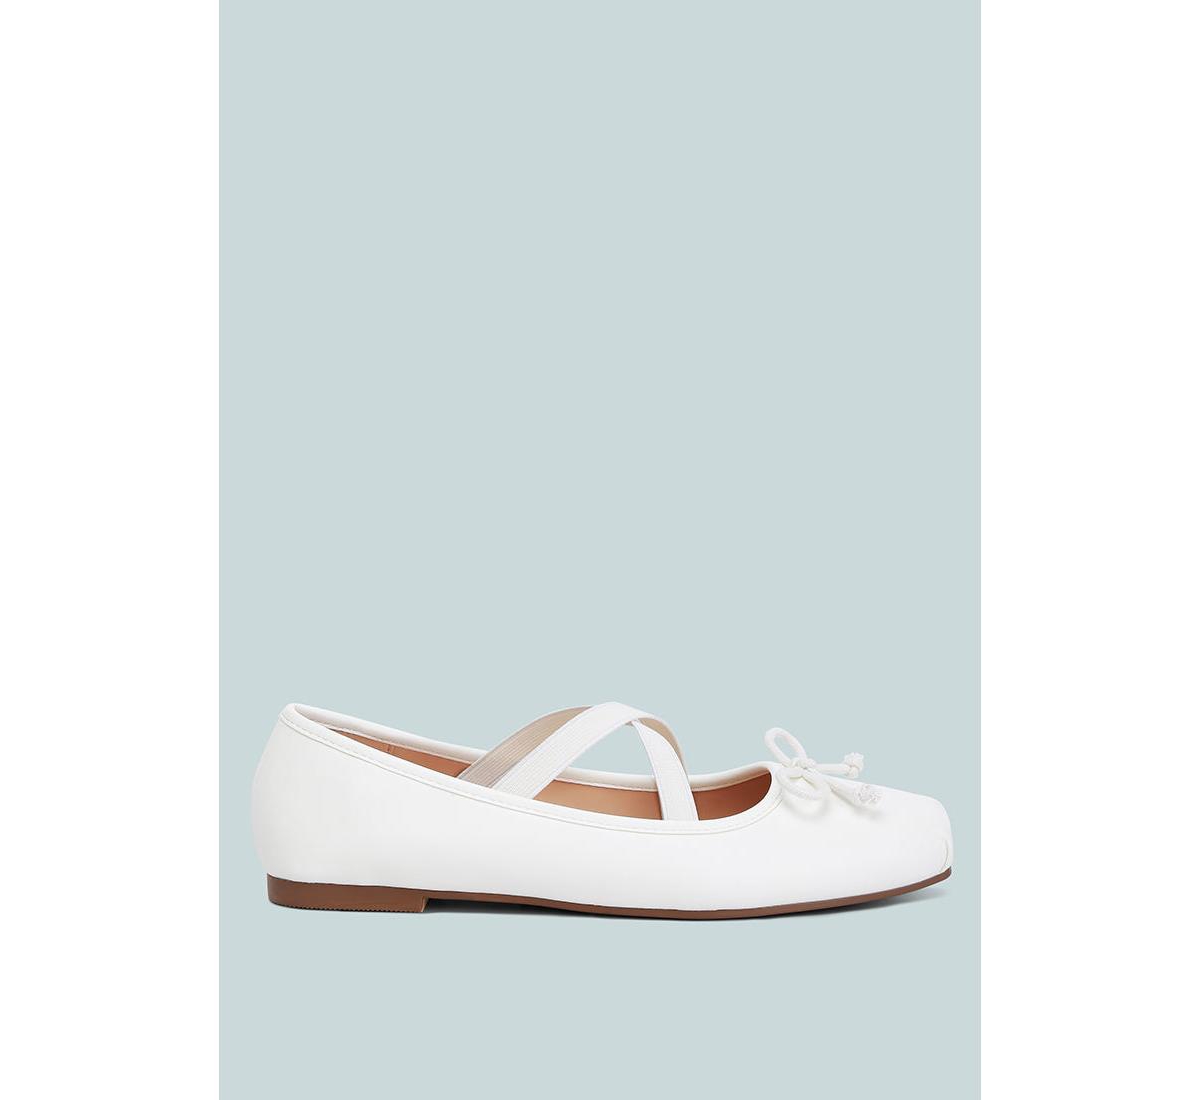 leina recycled faux leather ballet flats - White